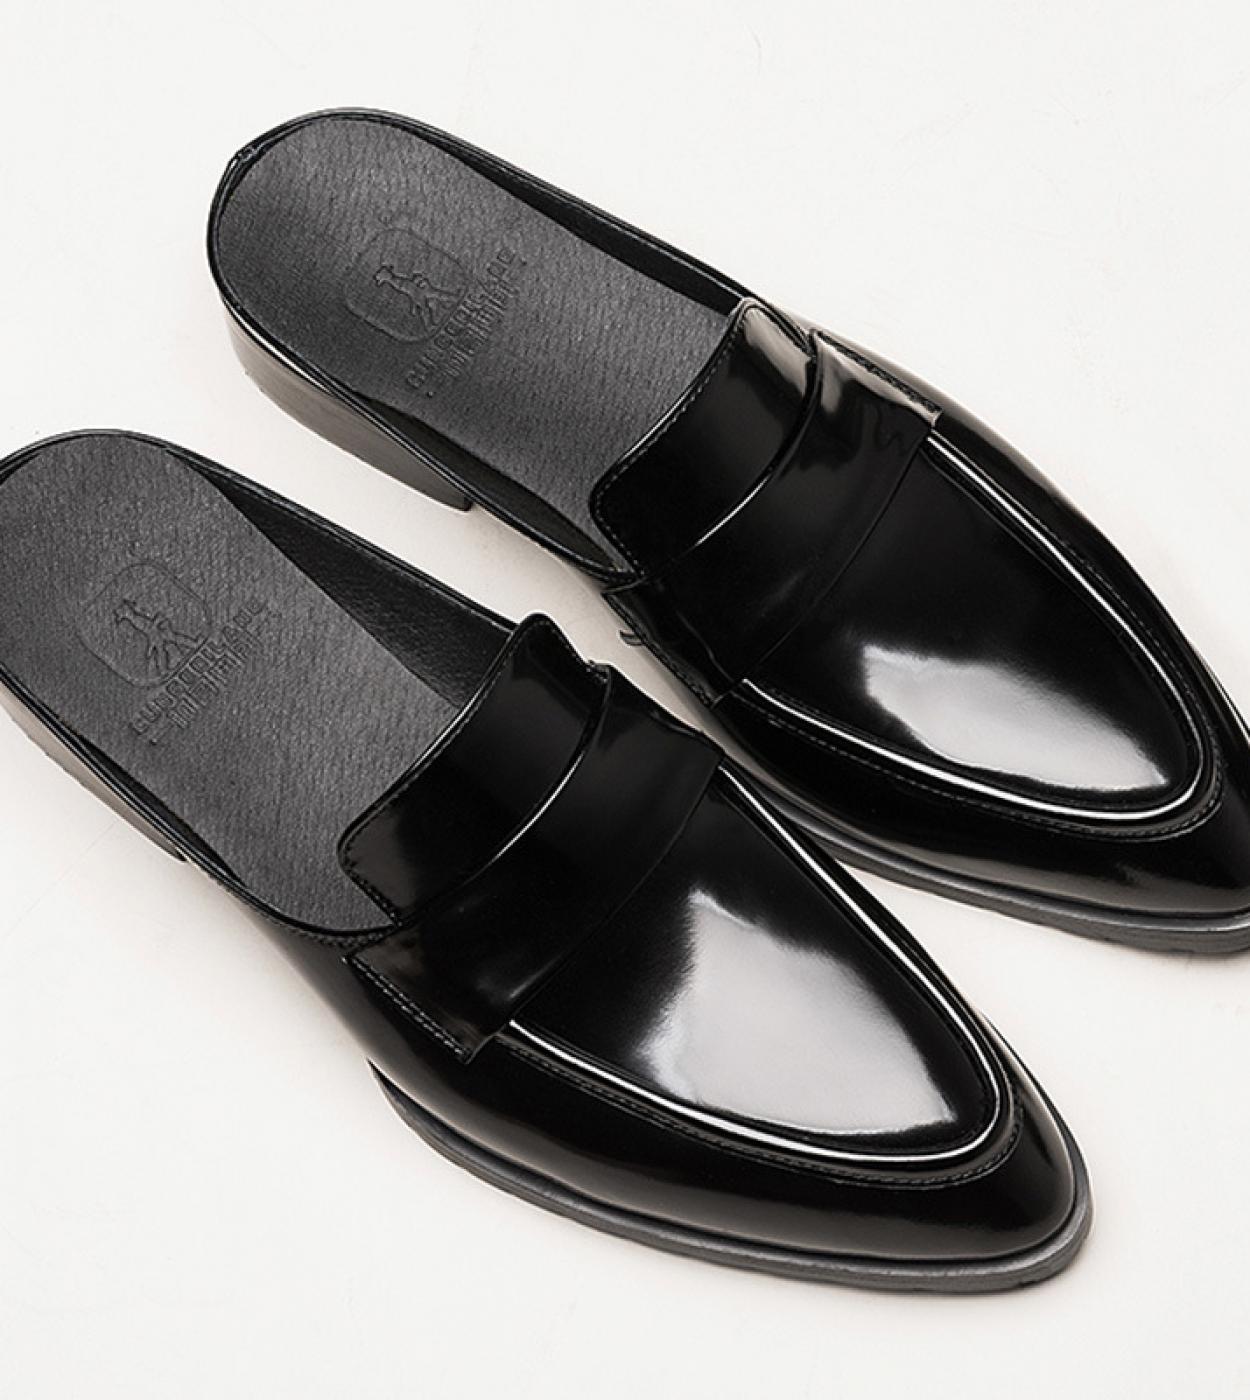 Black Men Dress Shoes Half Slippers Luxury Genuine Leather Mens Summer Office Shoes Quality Breathable Casual Sandals O